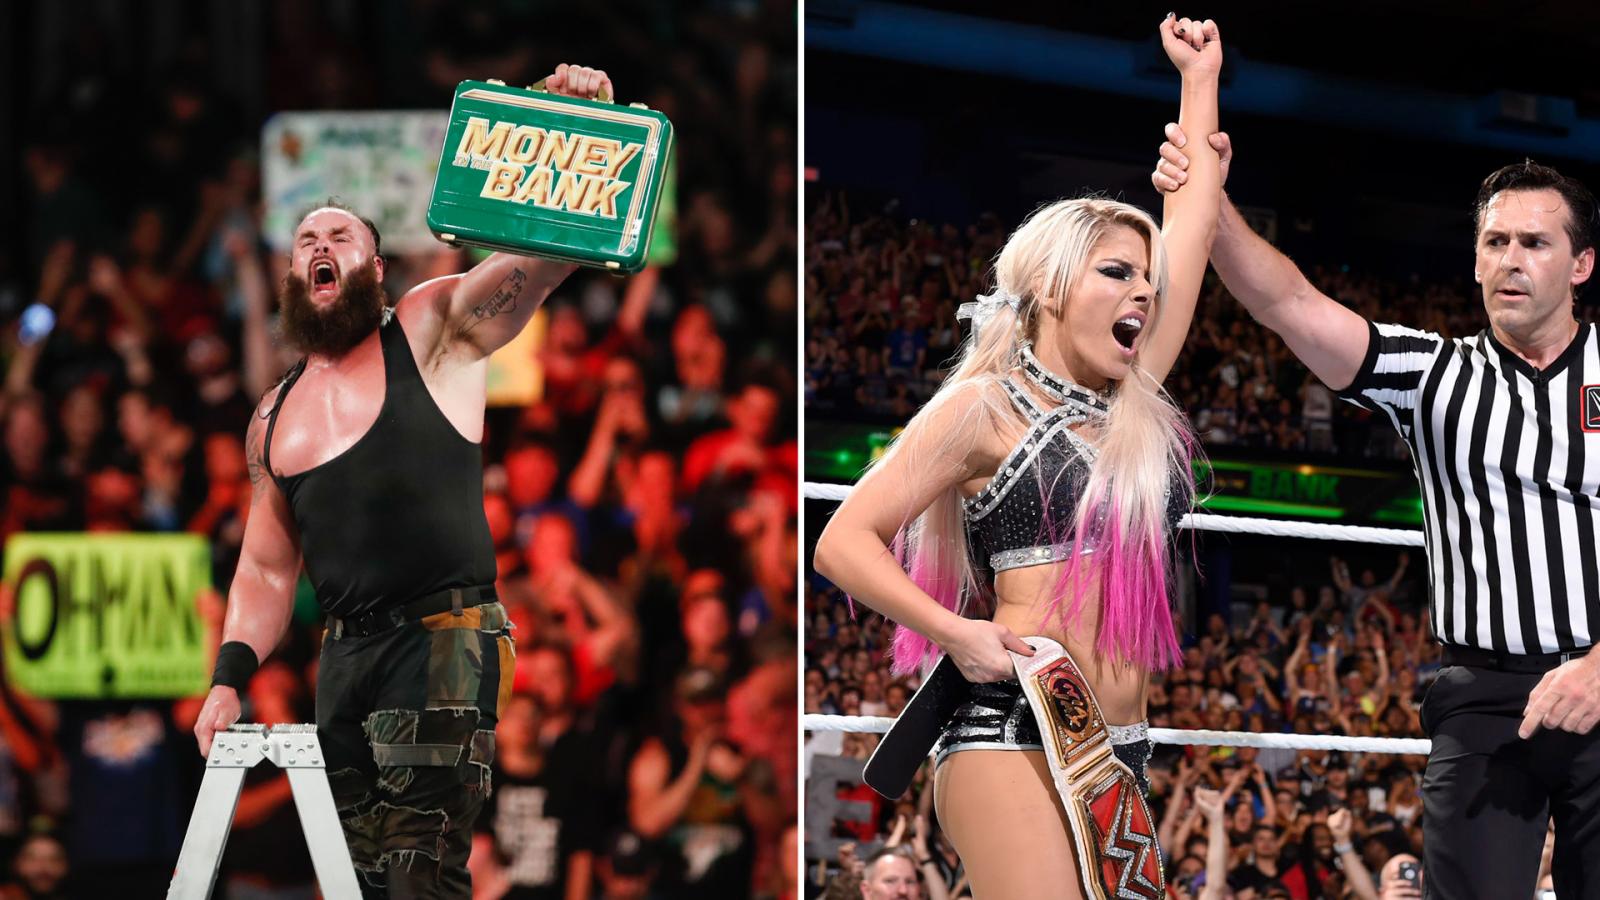 WWE Money in the Bank 2018 review: An entertaining show with questionable outcomes